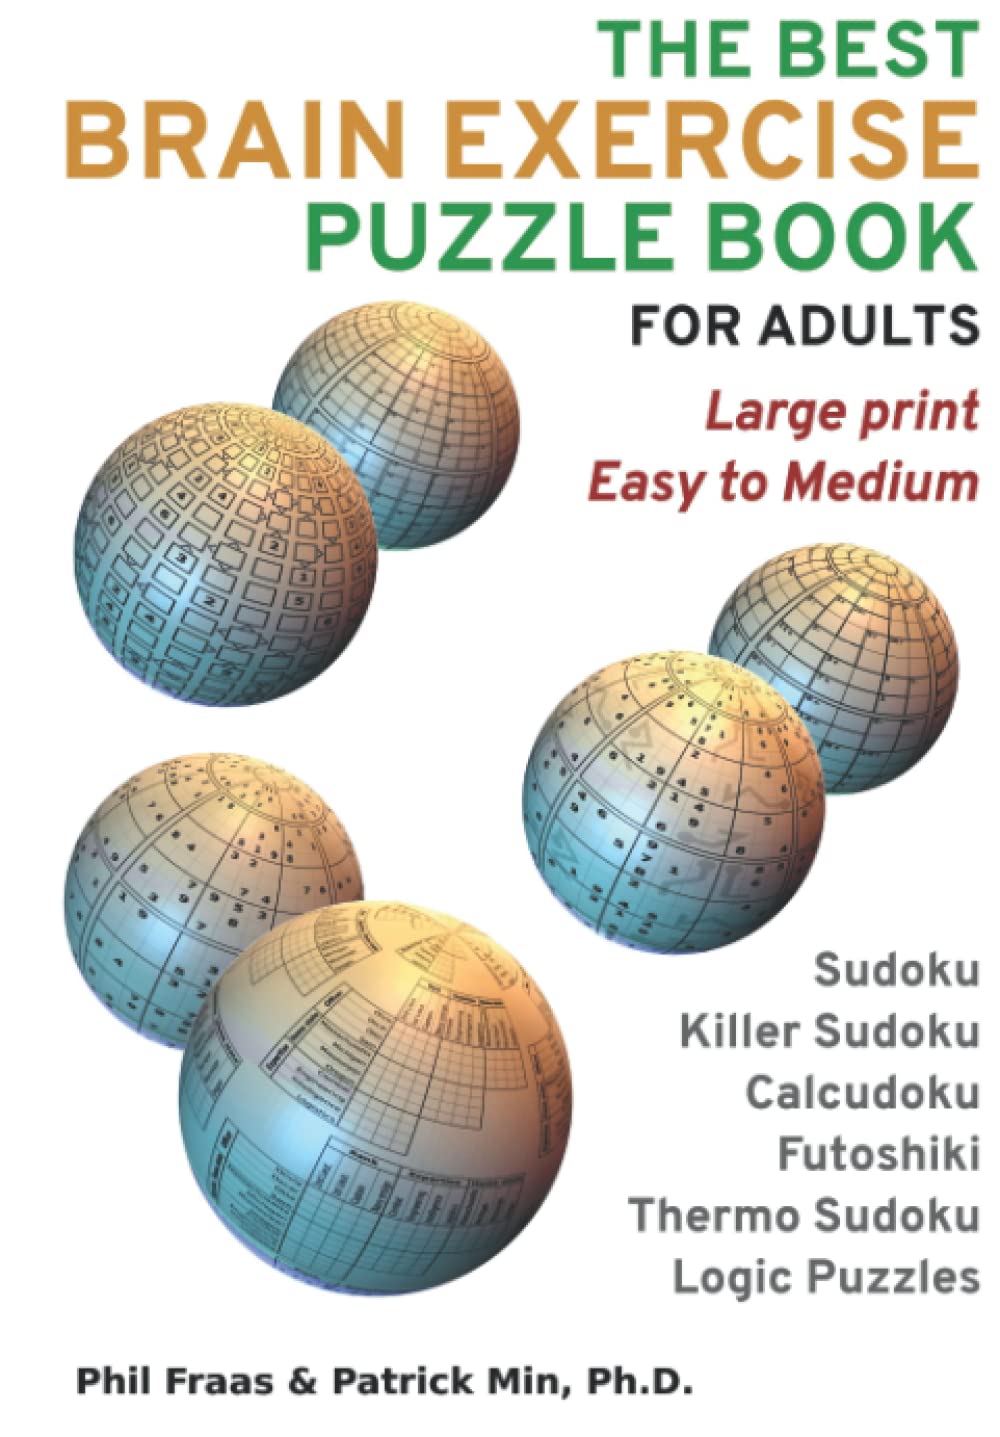 Your Puzzle Source,LLC The-best-brain-excercise-puzzle-book-for-adults